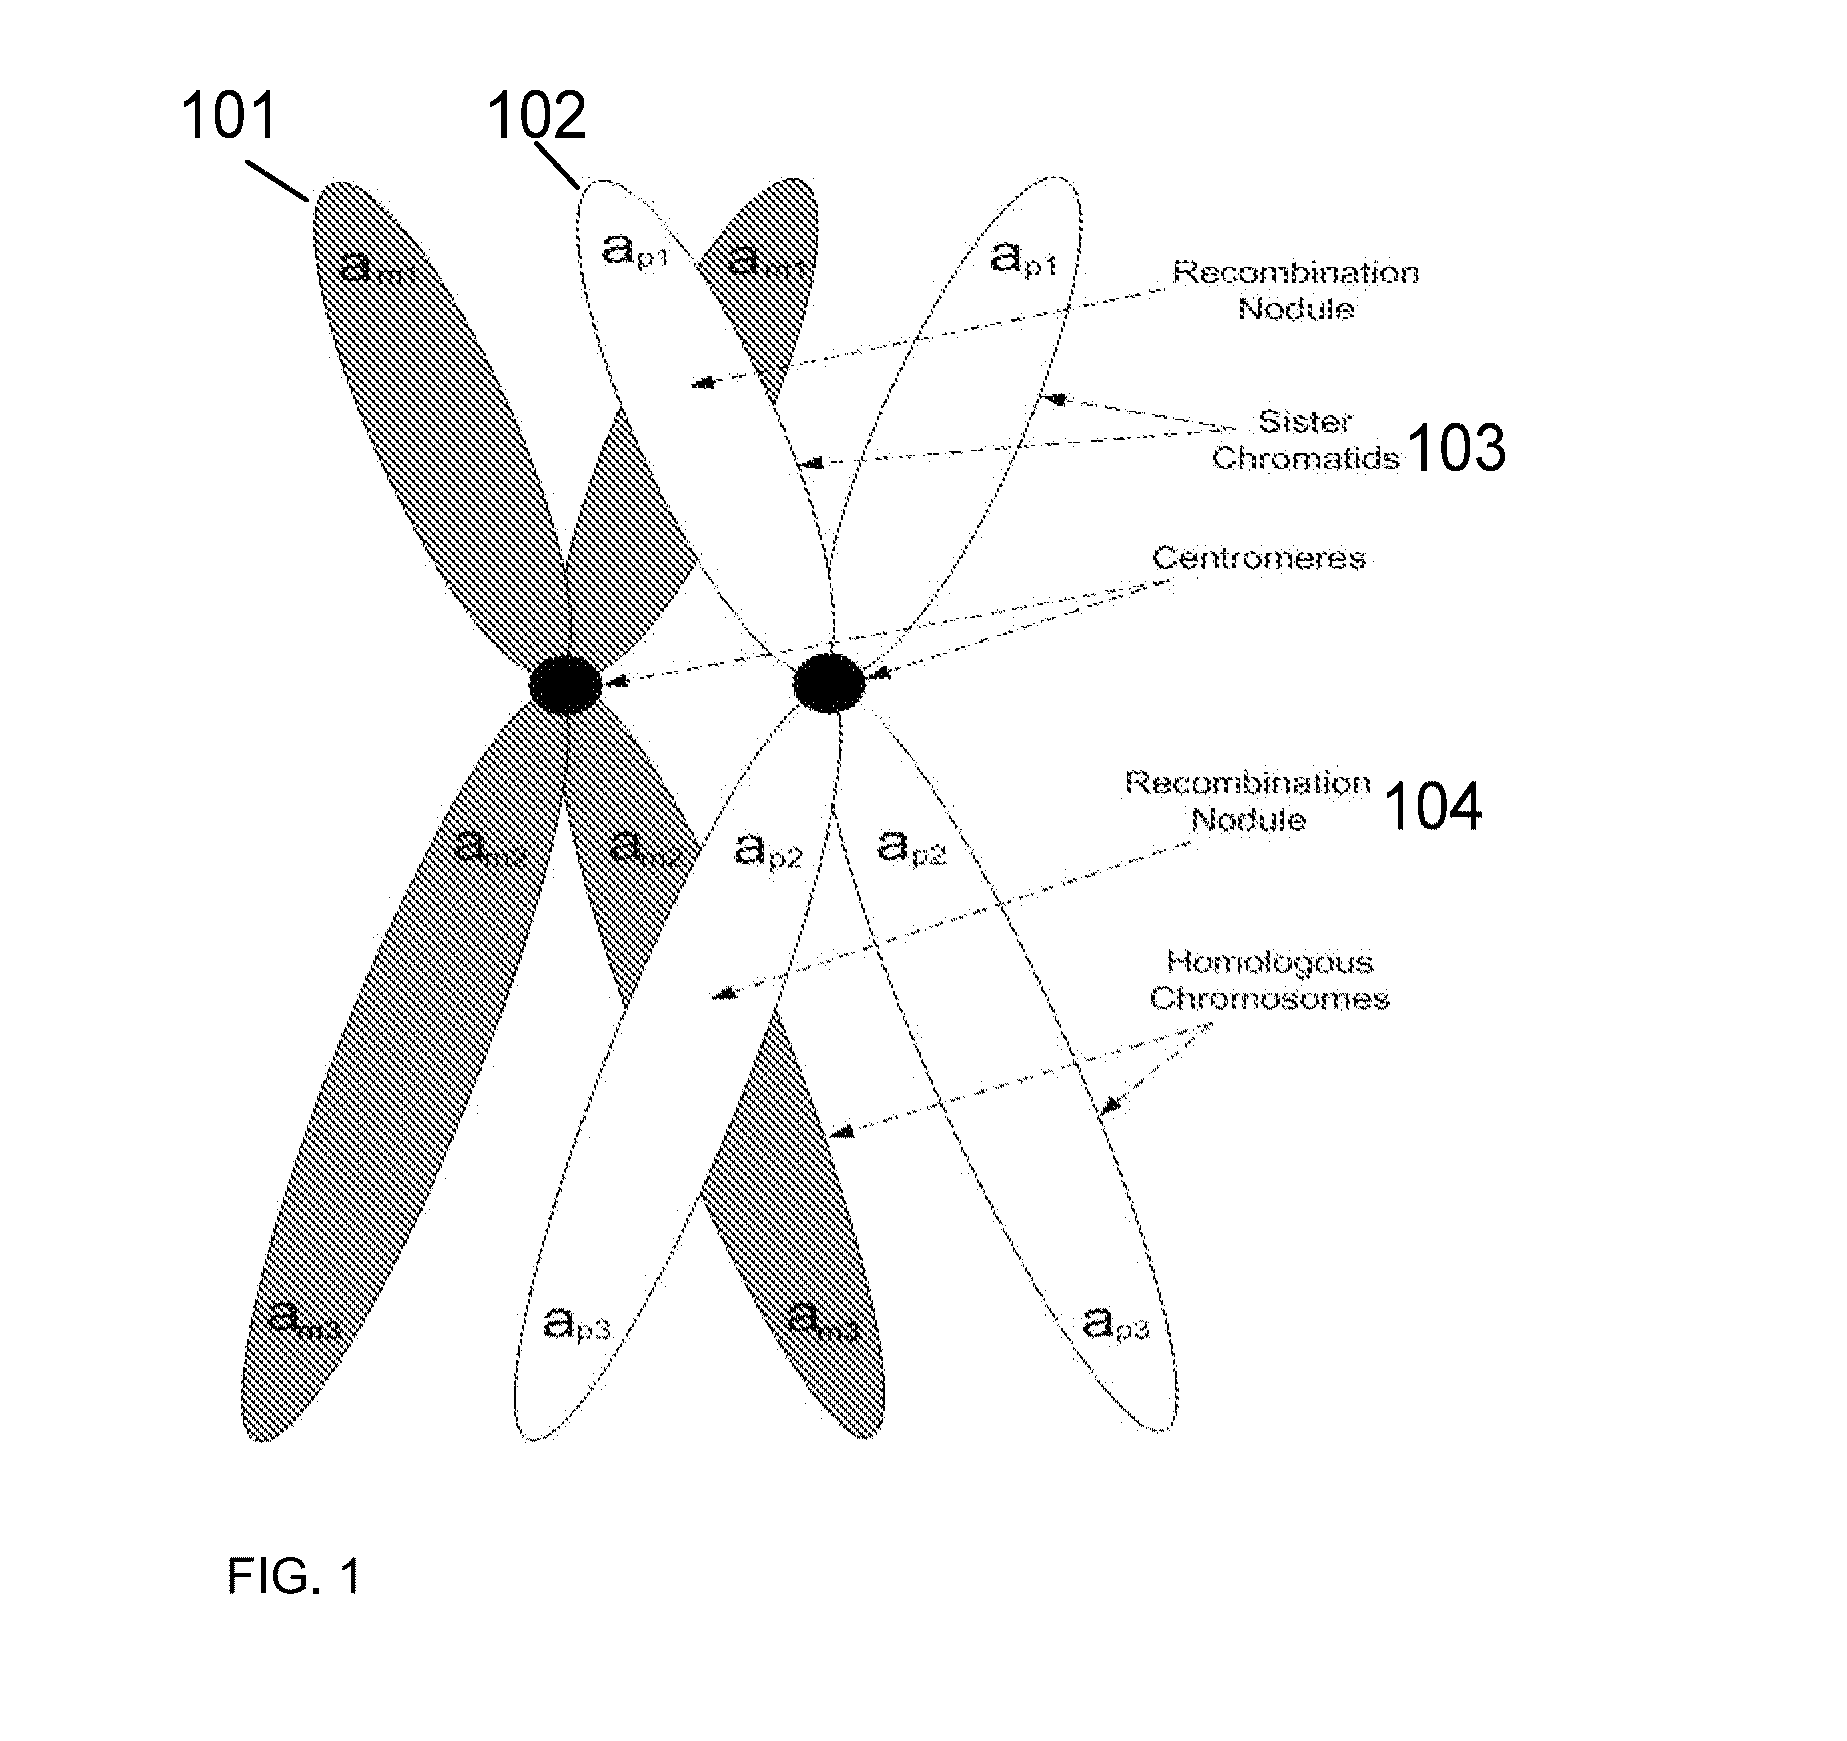 System and method for cleaning noisy genetic data from target individuals using genetic data from genetically related individuals